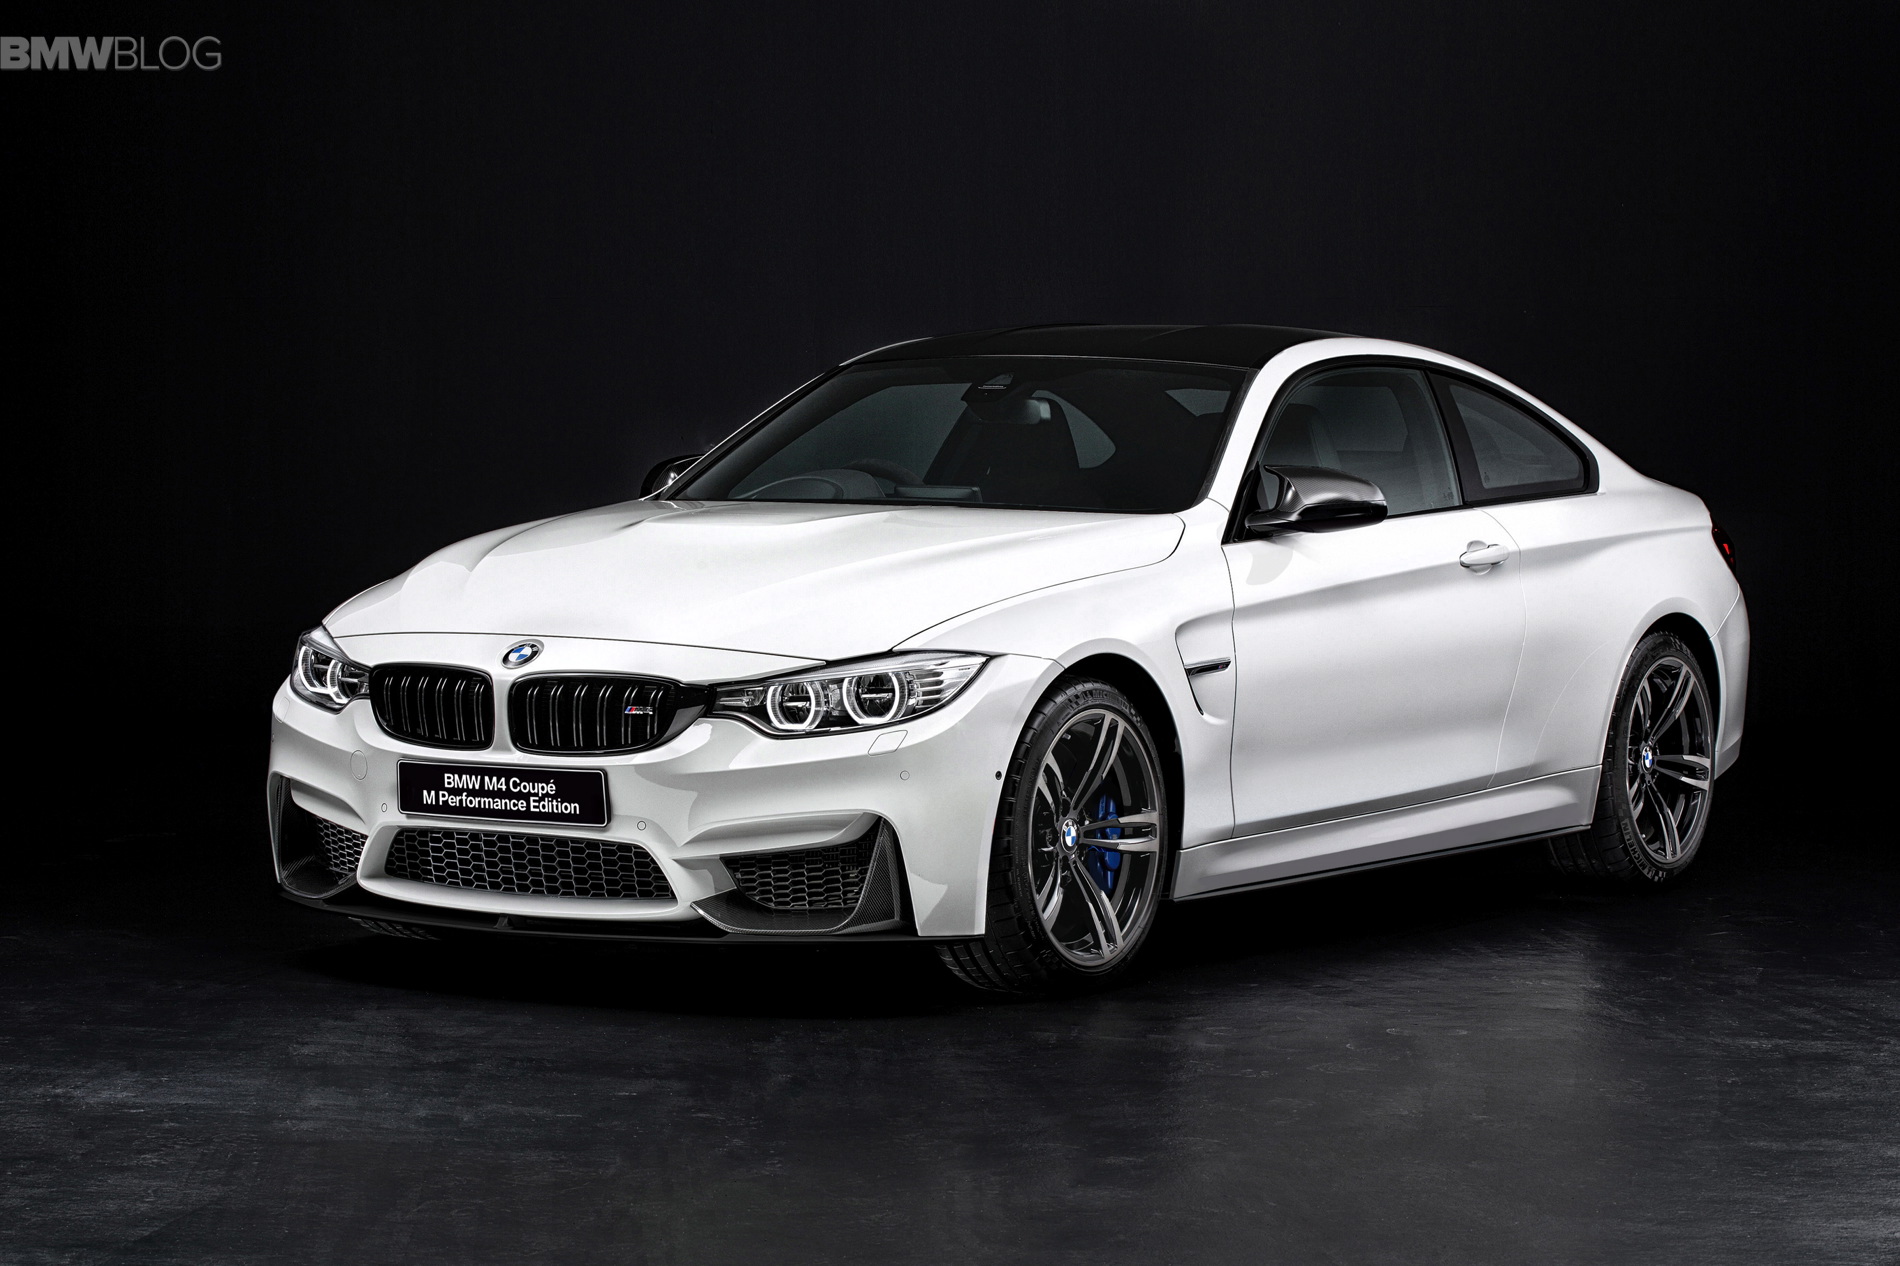 BMW M4 Coupe M Performance Edition for Japan